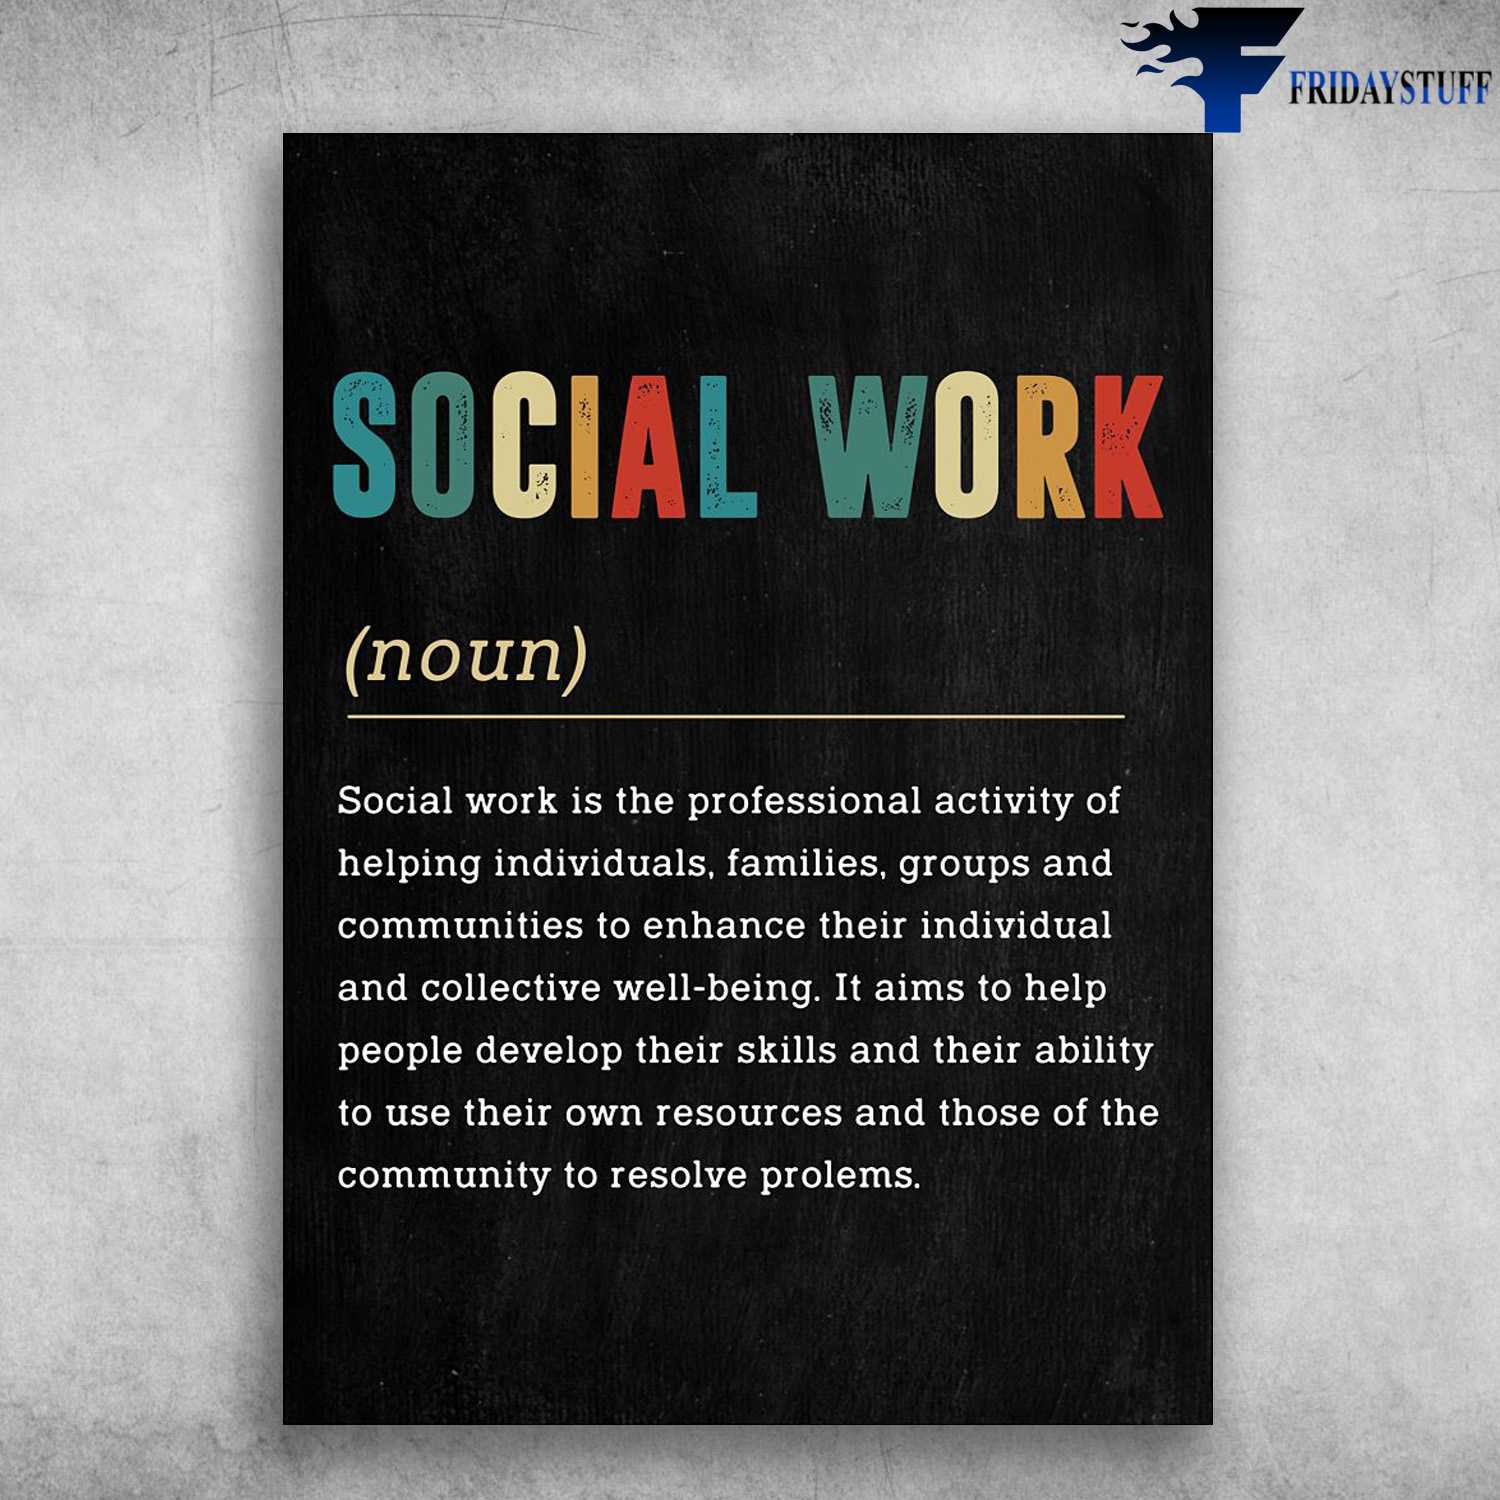 Social Worker - Social Work Definition, Social Work Is The Professional Activity, Of Helping Individuals, Families, Group And Communities, To Enhance Their Individua, And Collective Well-being